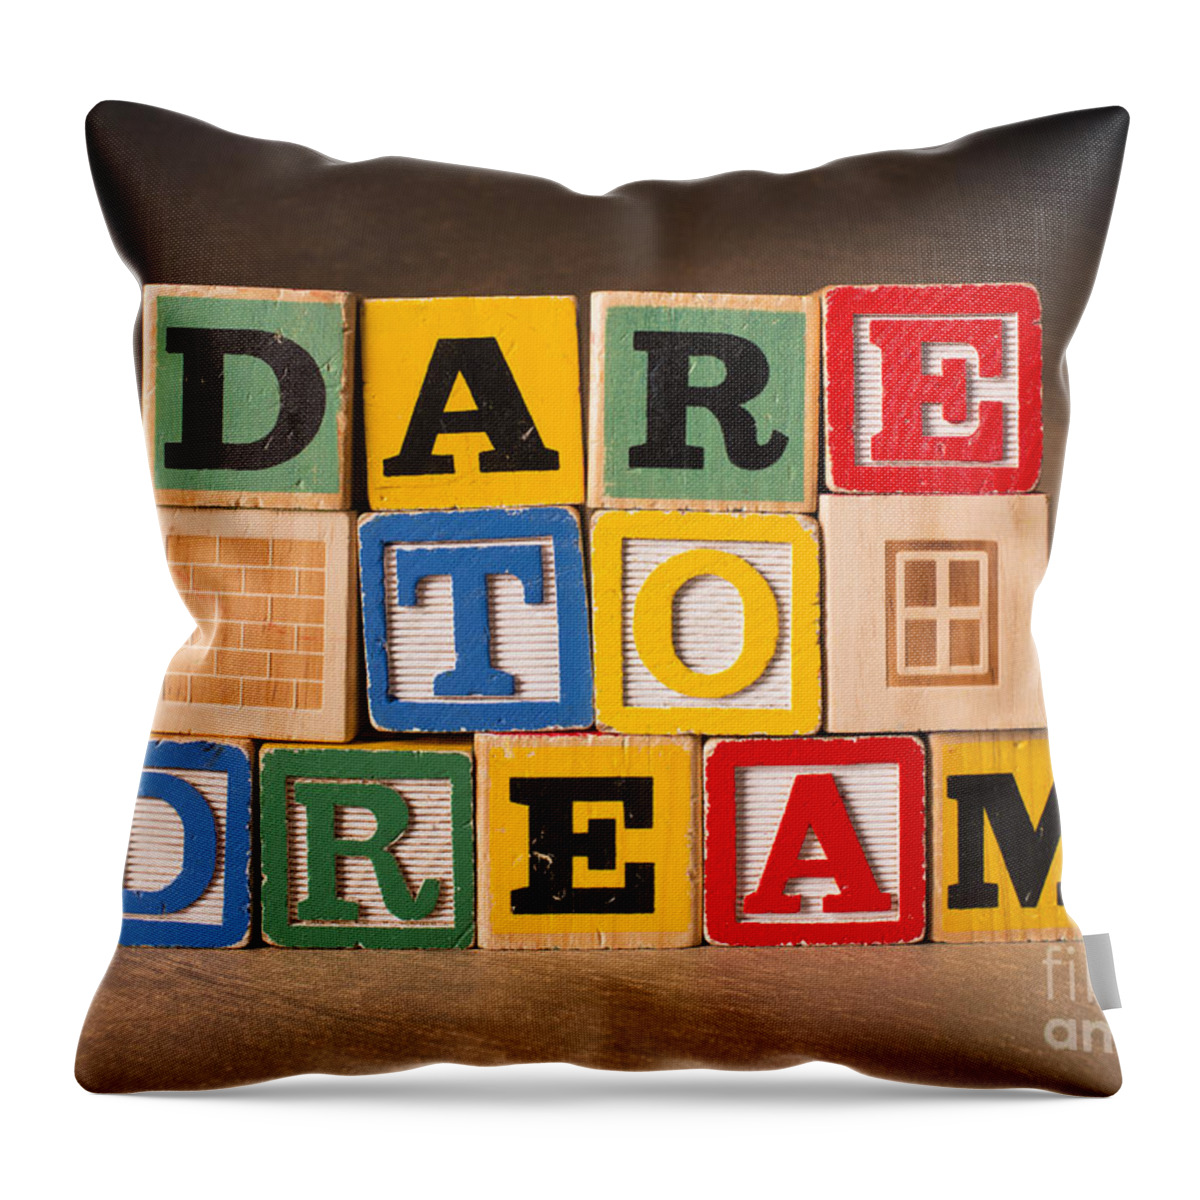 Dare To Dream Throw Pillow featuring the photograph Dare To Dream by Art Whitton